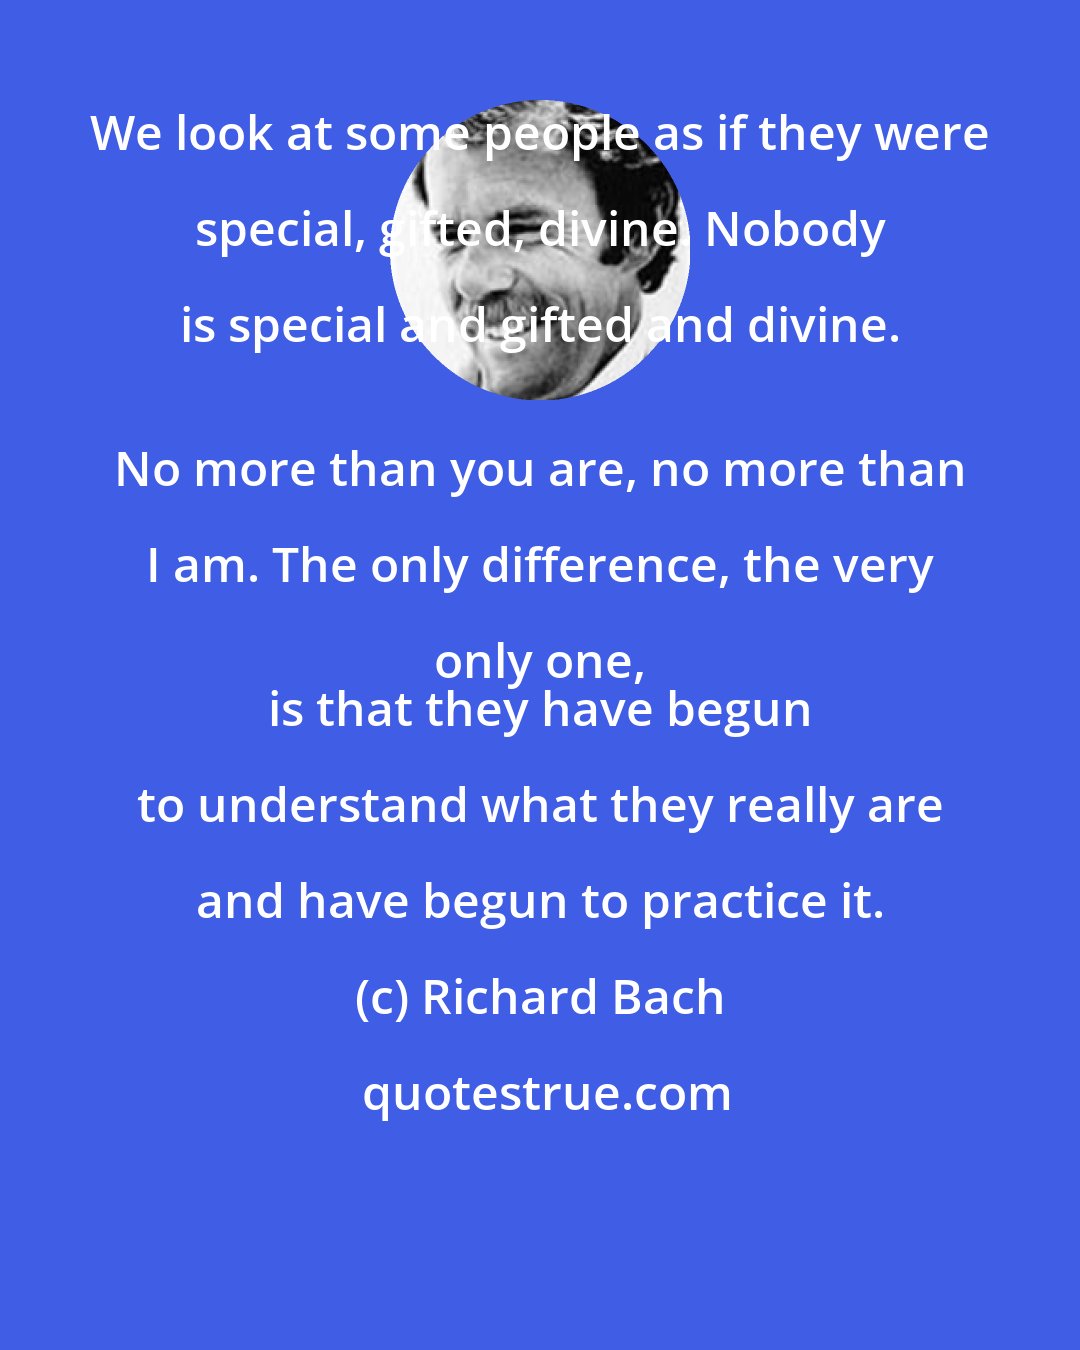 Richard Bach: We look at some people as if they were special, gifted, divine. Nobody is special and gifted and divine. 
 No more than you are, no more than I am. The only difference, the very only one, 
 is that they have begun to understand what they really are and have begun to practice it.